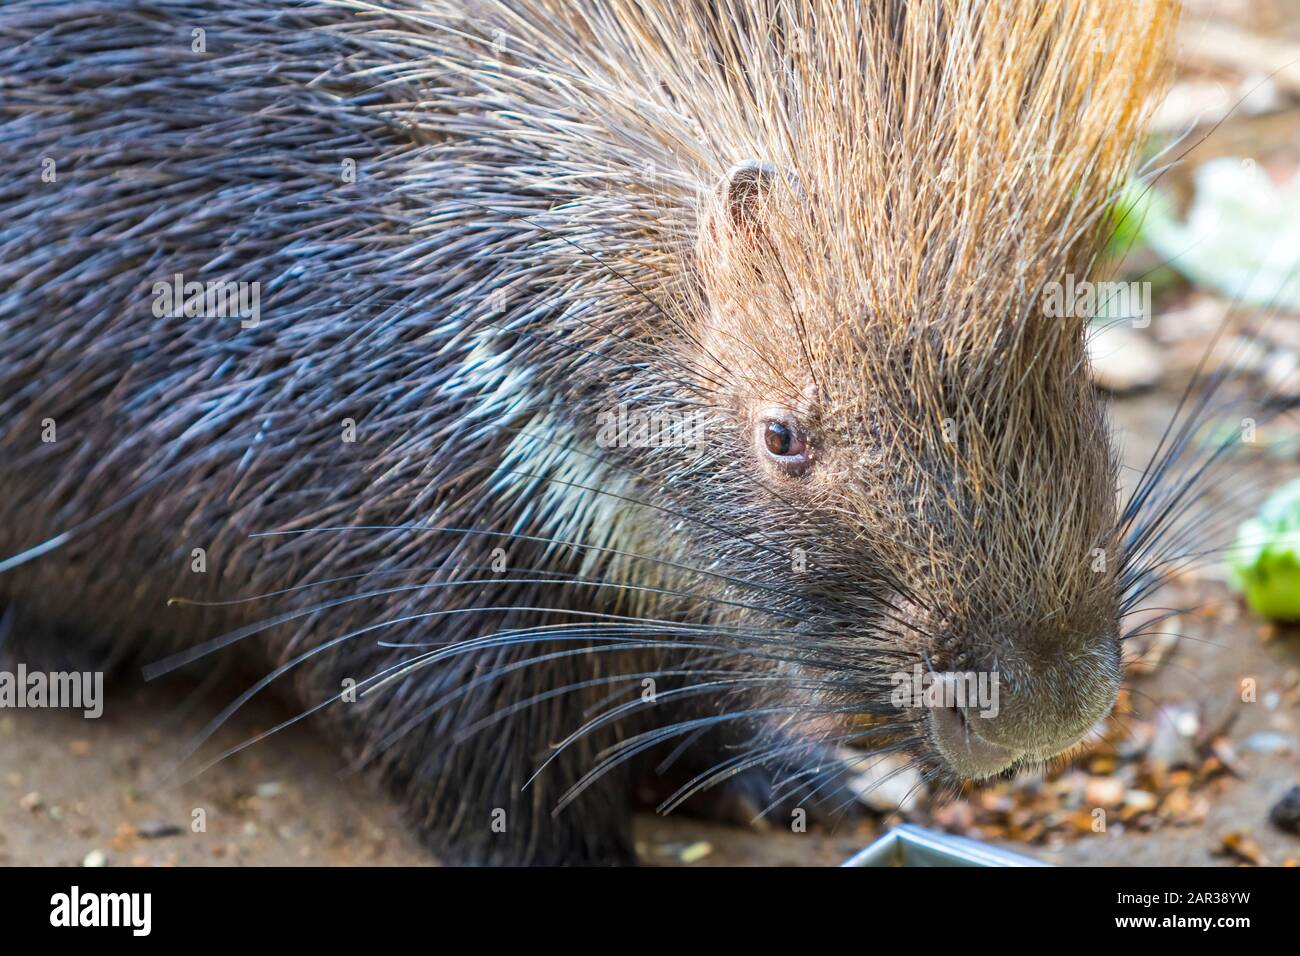 Close-up portrait of the Indian crested porcupine (Hystrix indica). Wildlife and nature photography Stock Photo